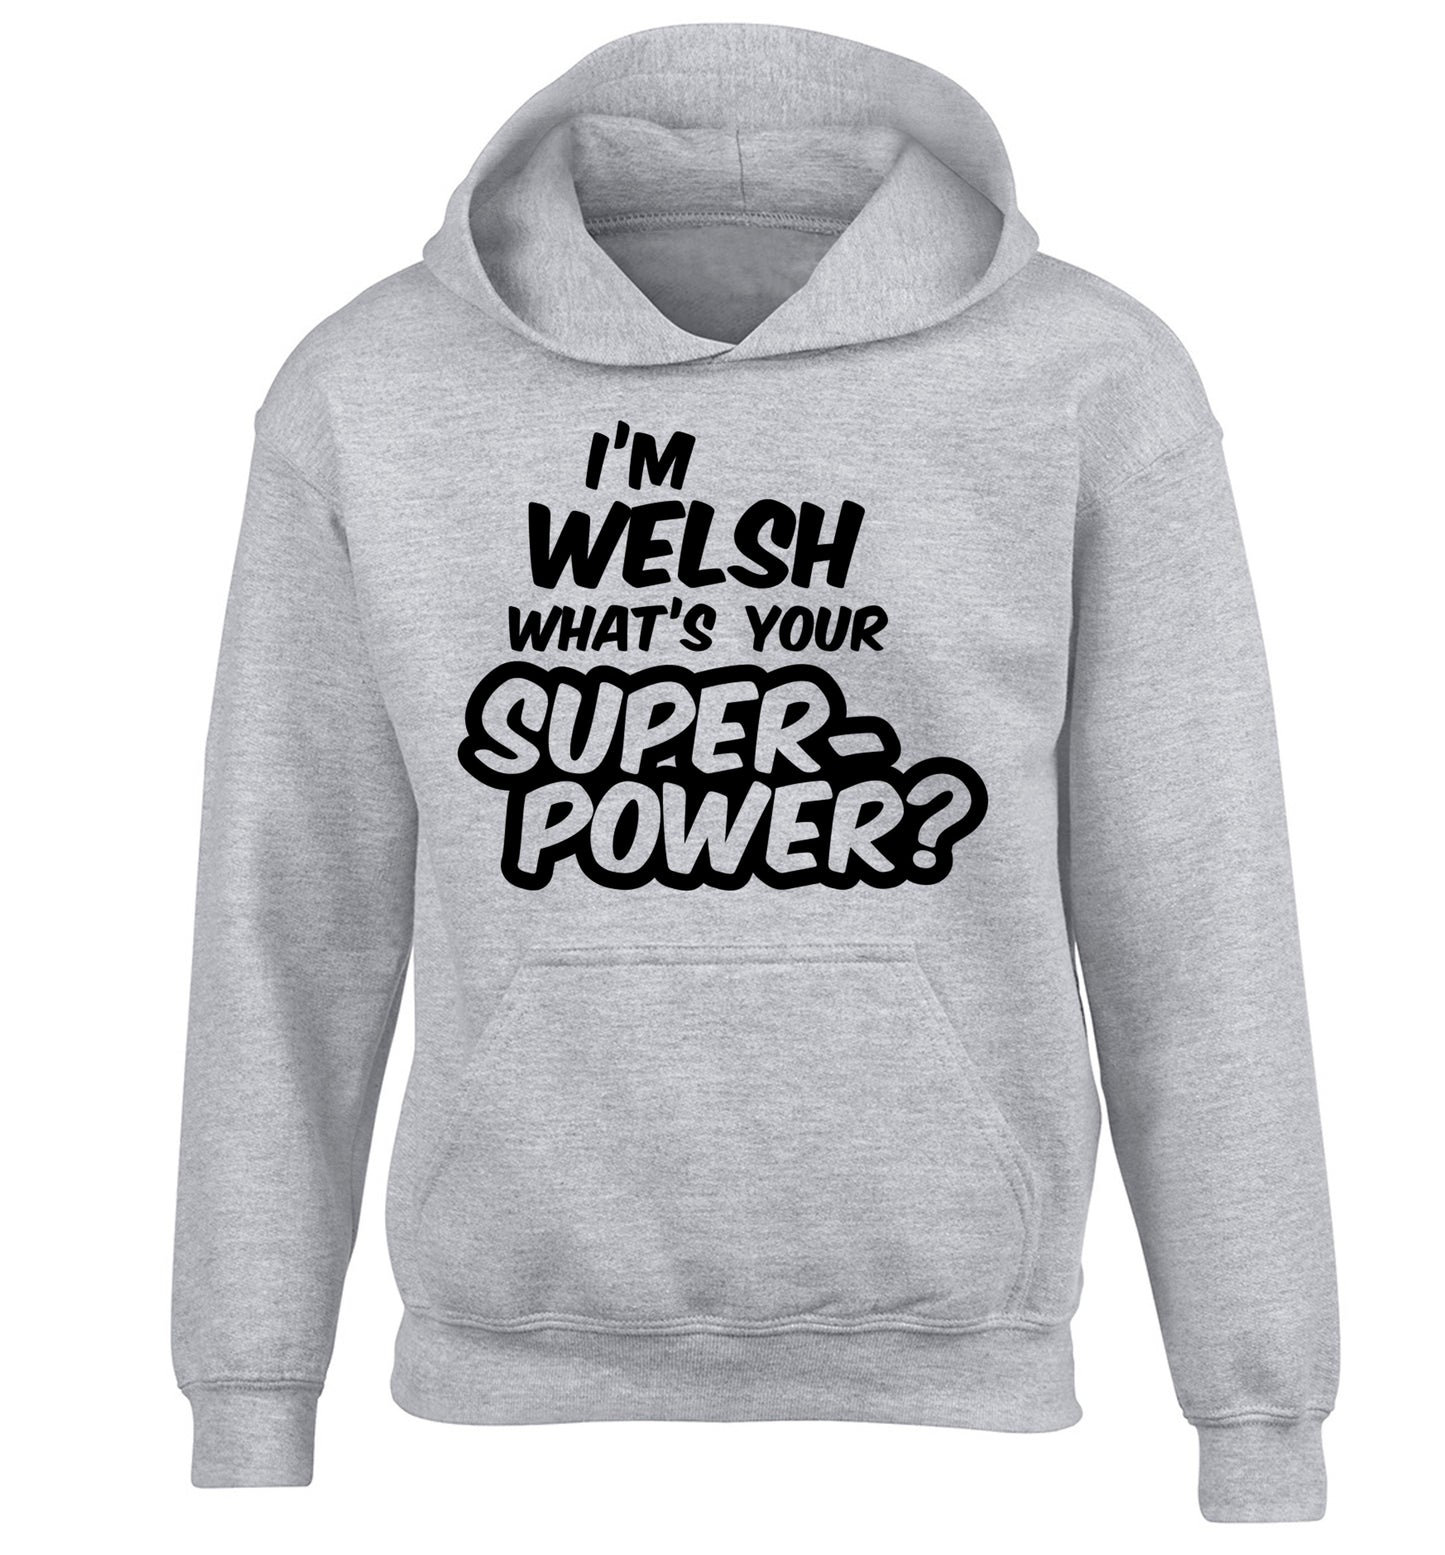 I'm Welsh what's your superpower? children's grey hoodie 12-13 Years